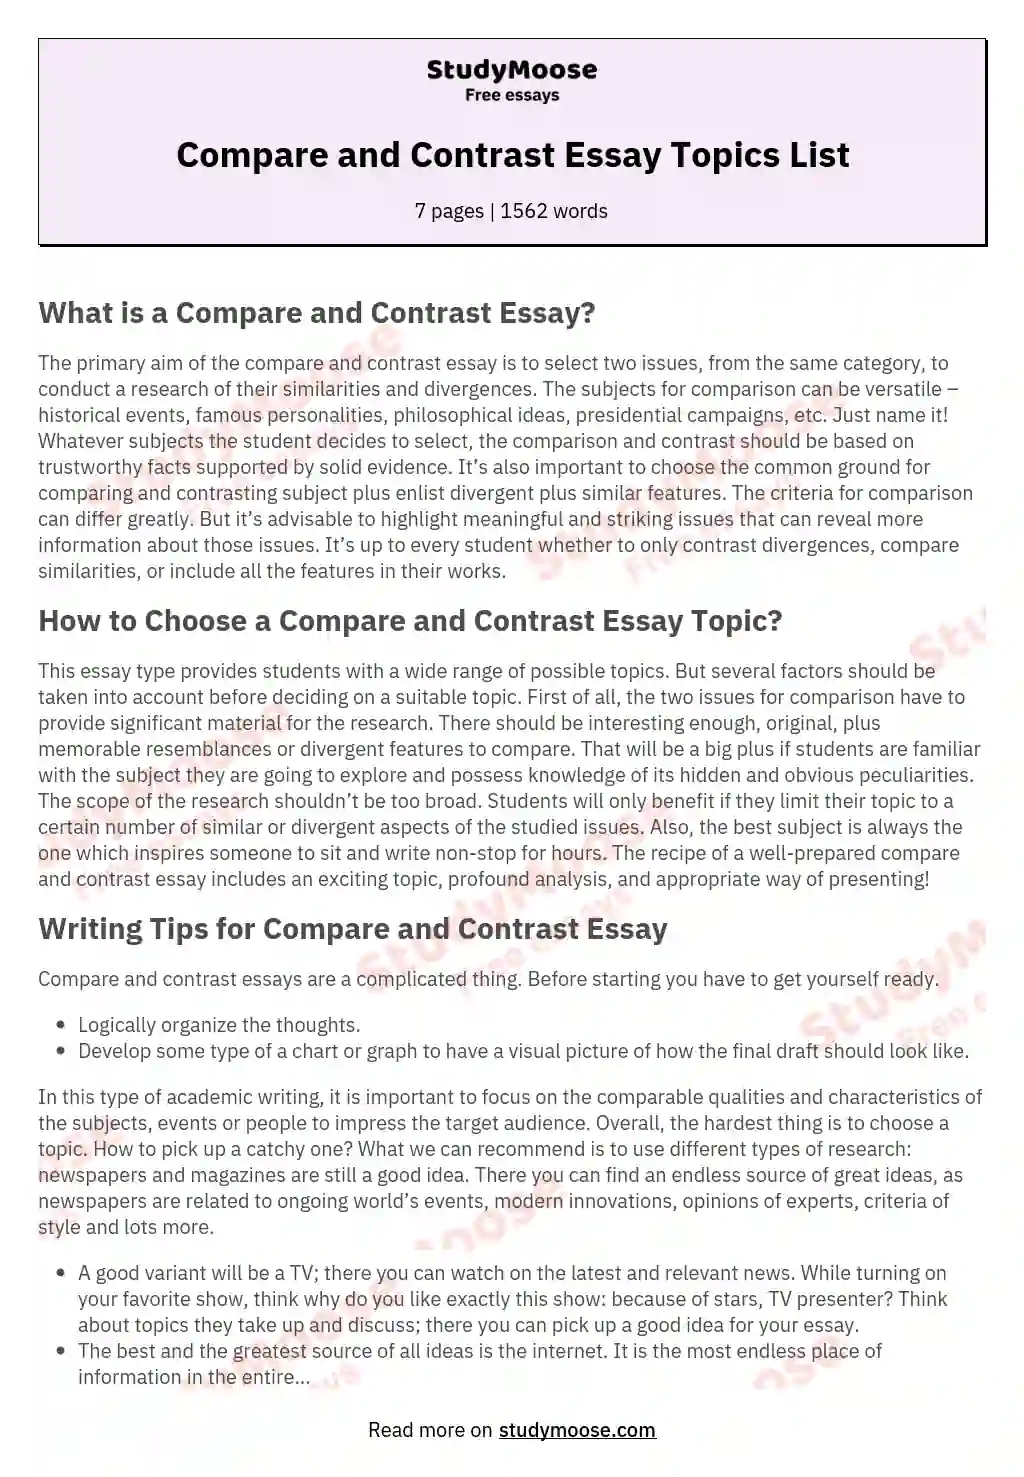 Compare and Contrast Essay Topics List